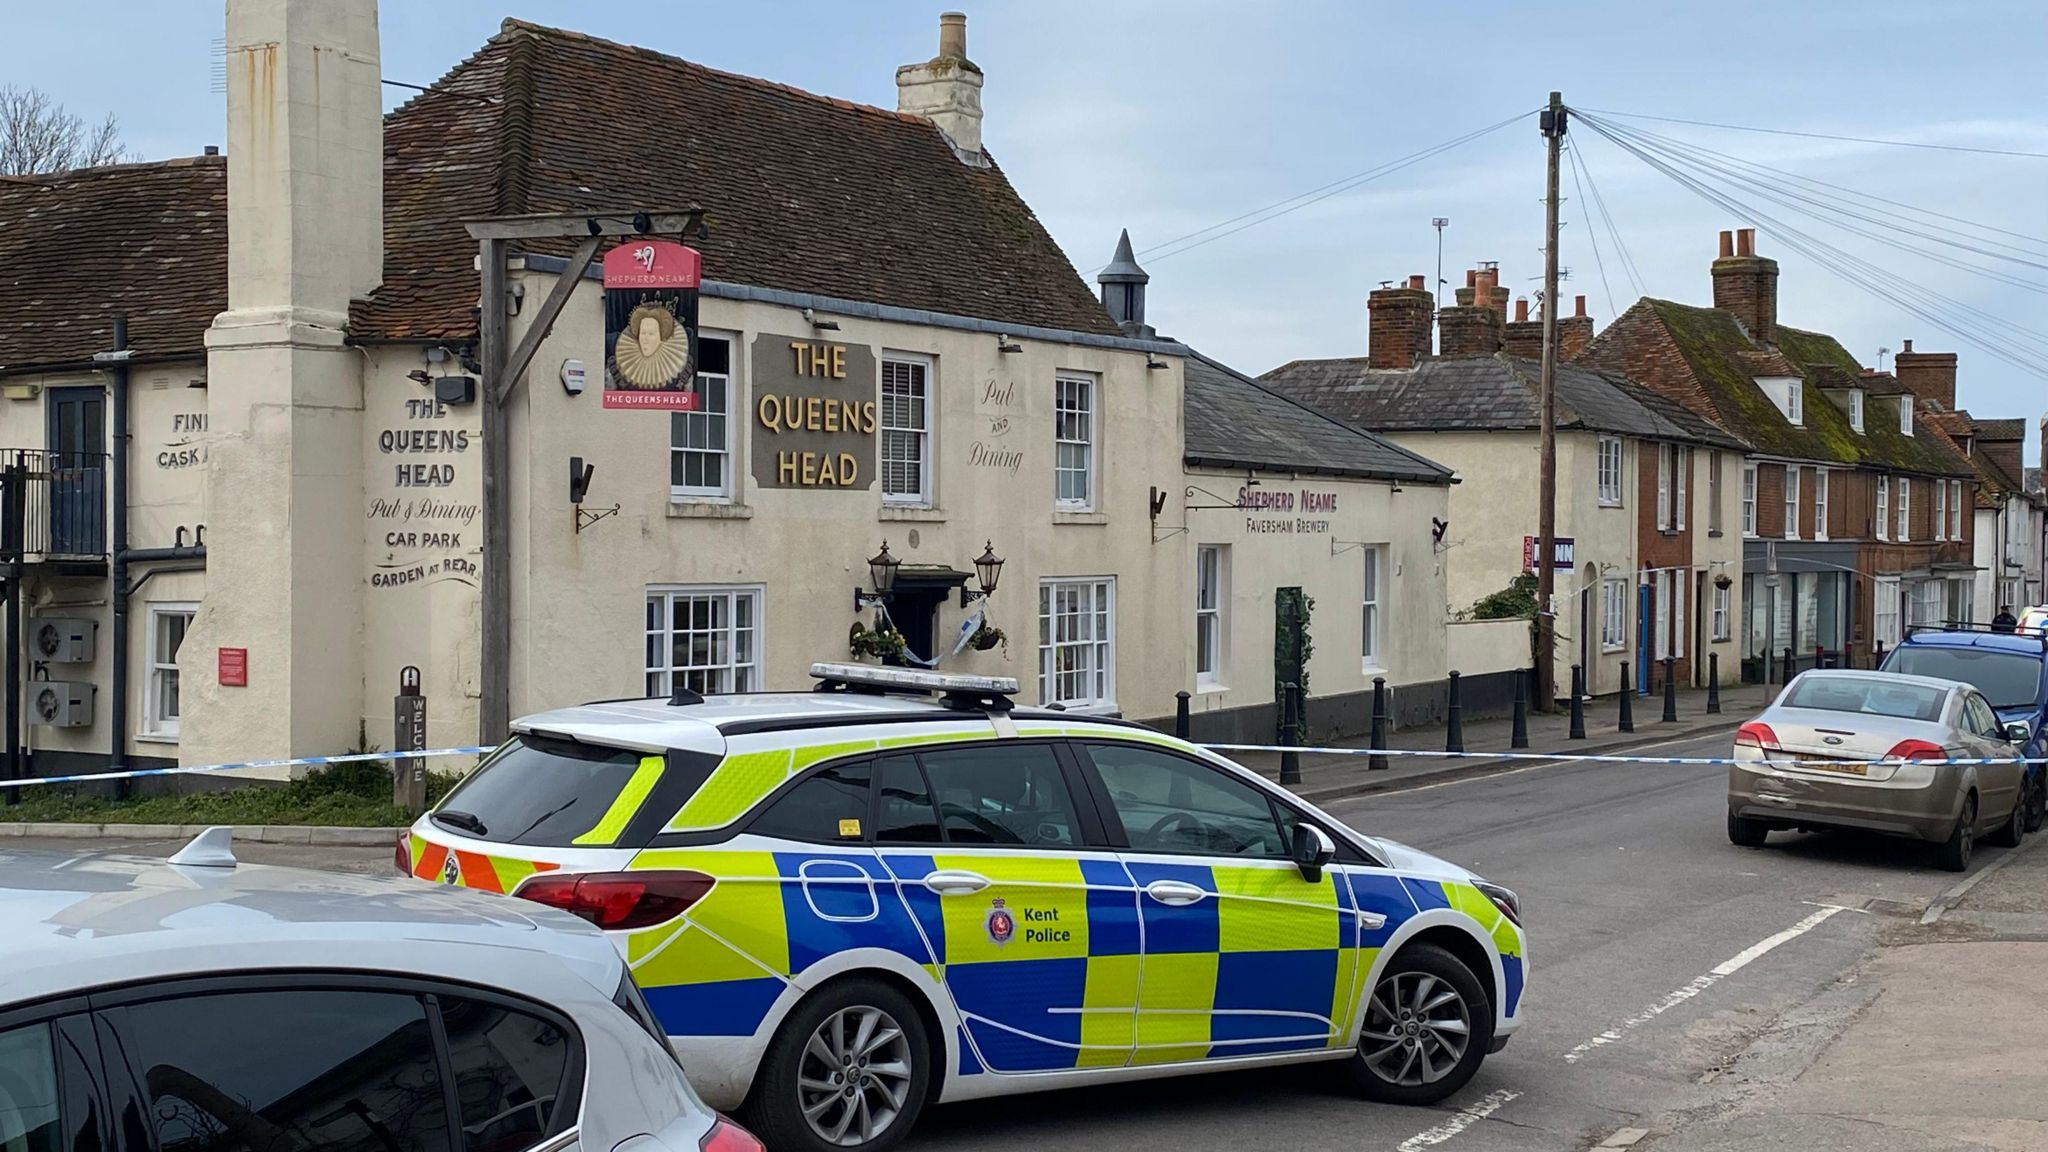 The Queen's Head pub in Boughton-under-Blean with a police car outside it